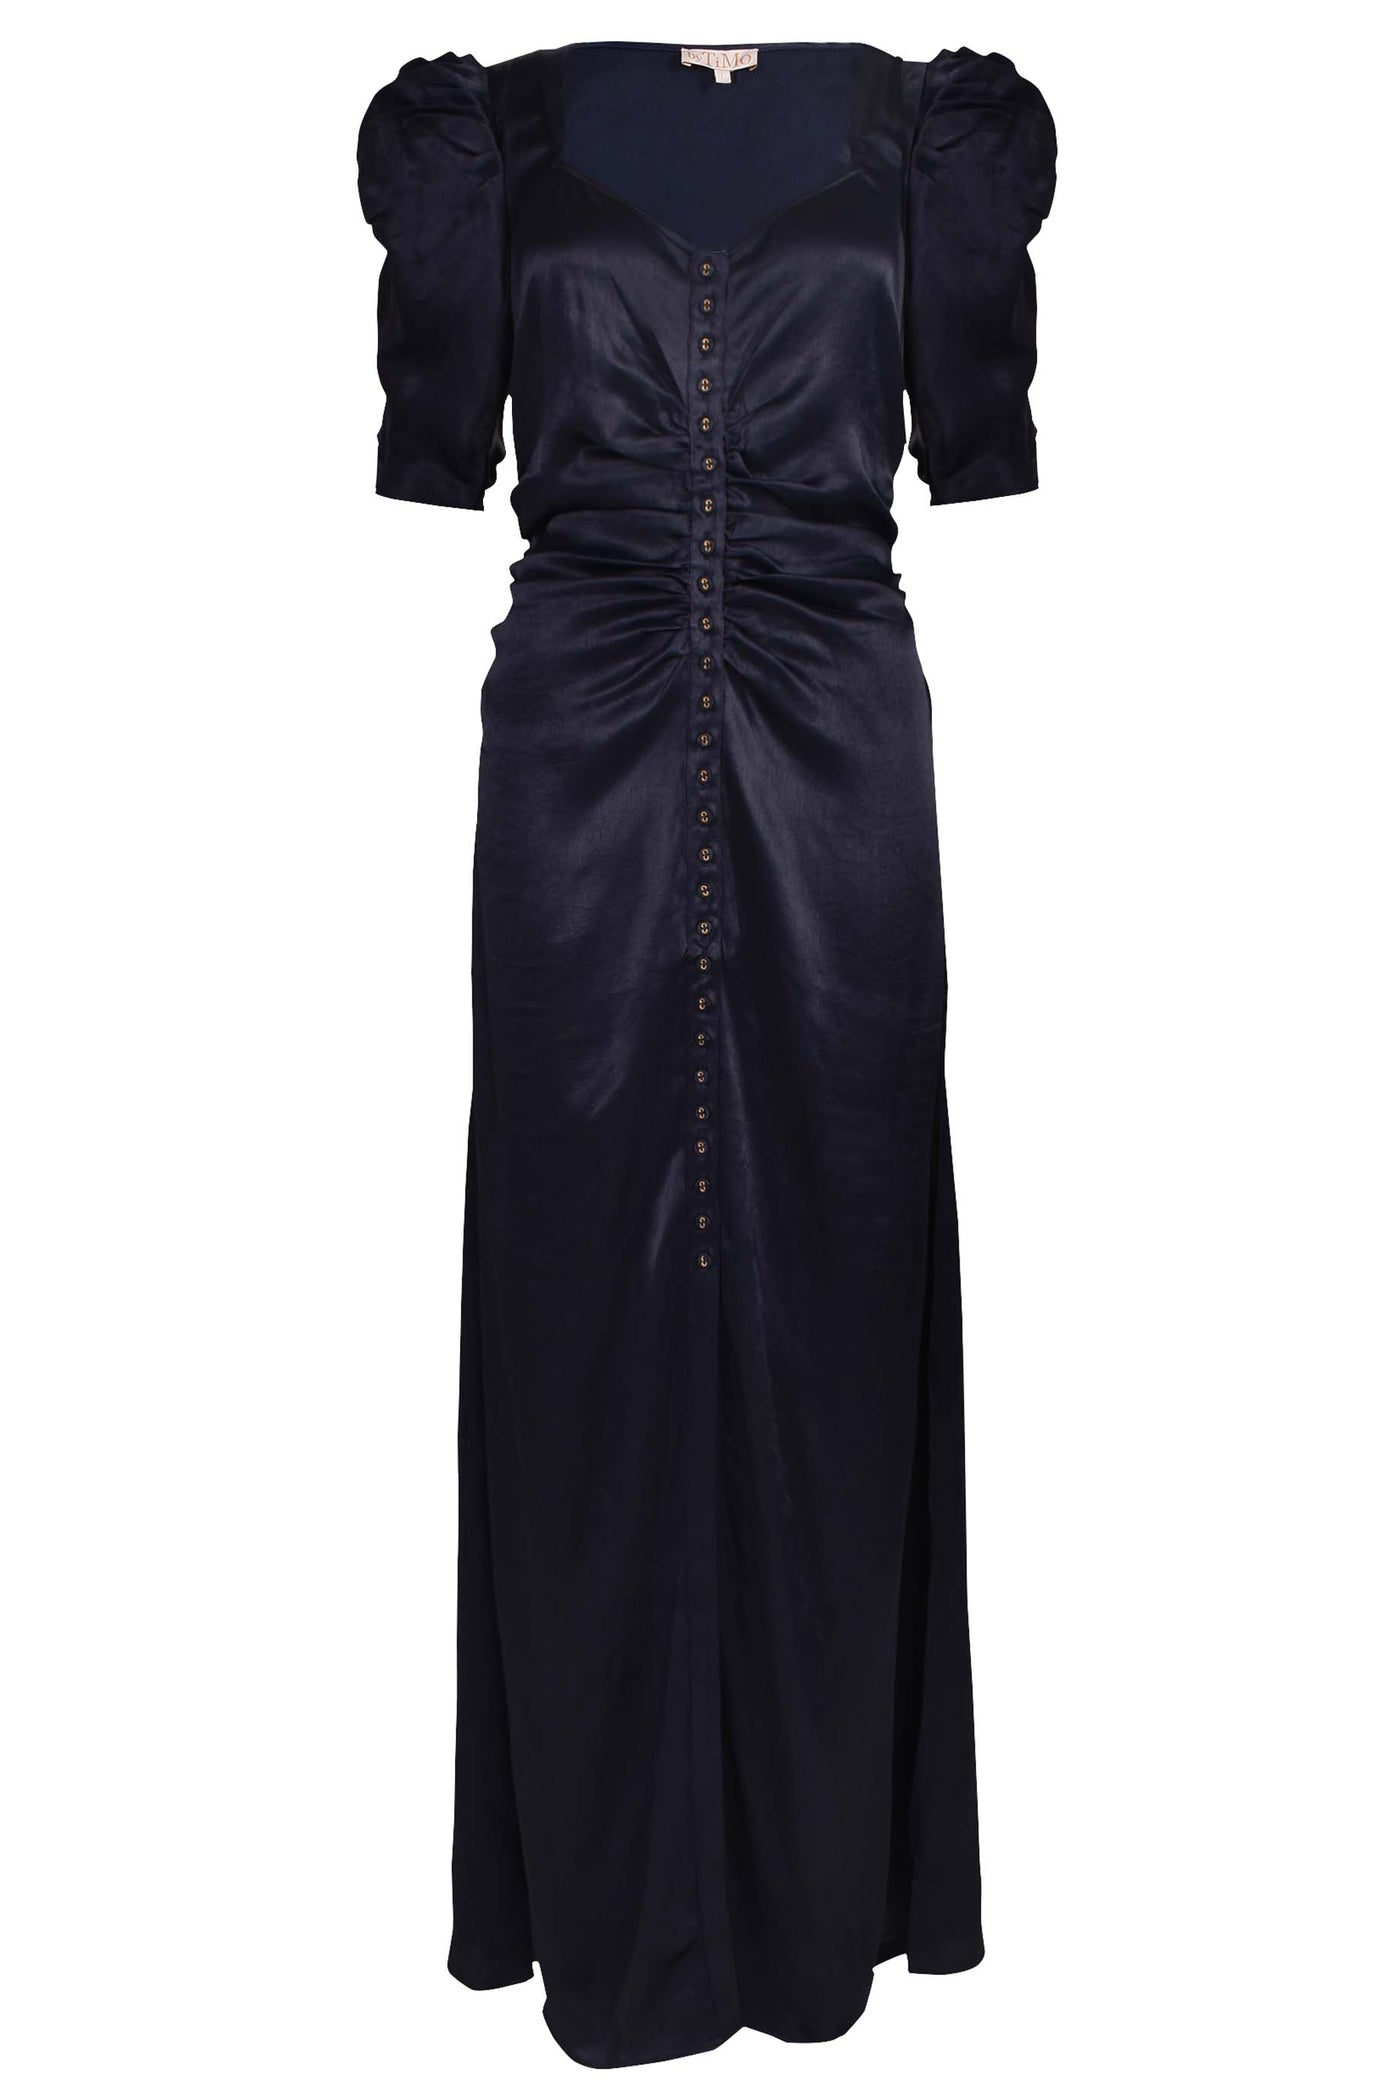 ByTimo Crown Dress - Navy